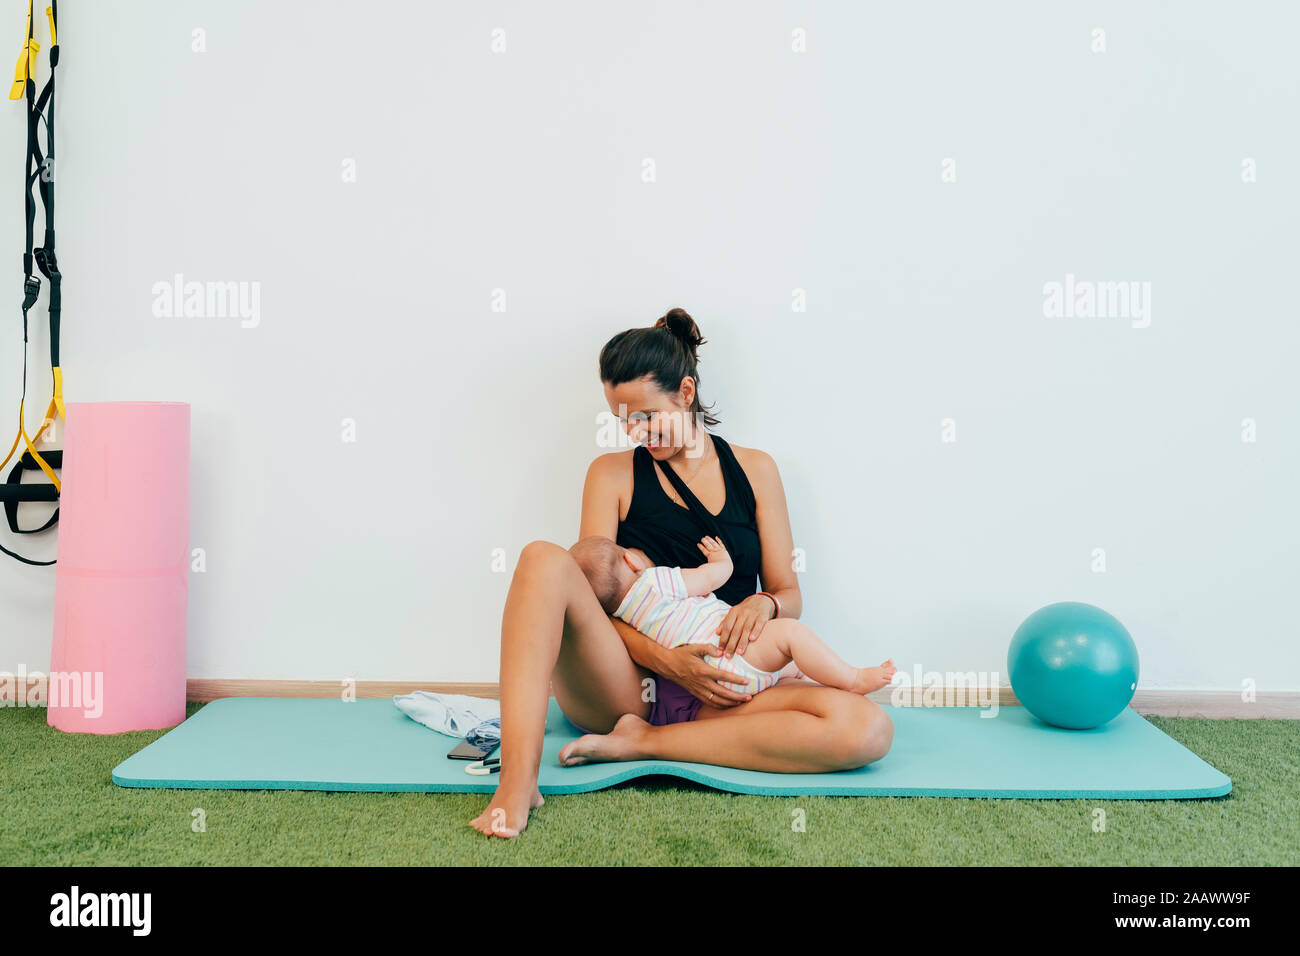 Breastfeeding High Resolution Stock Photography And Images Alamy Resources fotos business database community alamy imagenes stockphoto stockphotos library gallery foto pictures image search art design free stockphotography. https www alamy com young mother sitting on yoga mat breastfeeding her baby image333712219 html